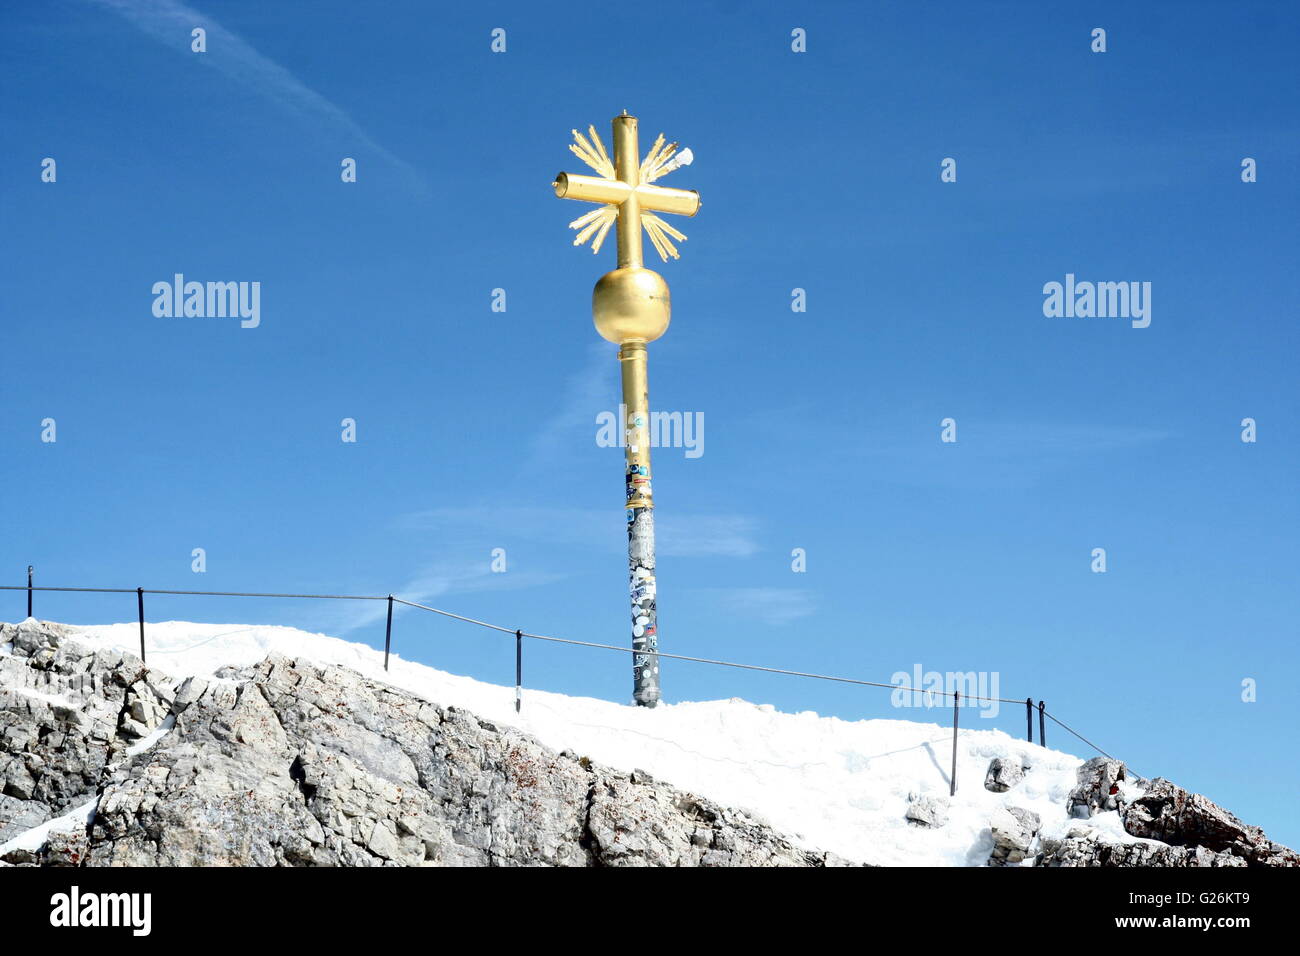 Gold cross marking the summit, Zugspitze, the highest peak in Germany.  The cross stands against a blue sky. Stock Photo